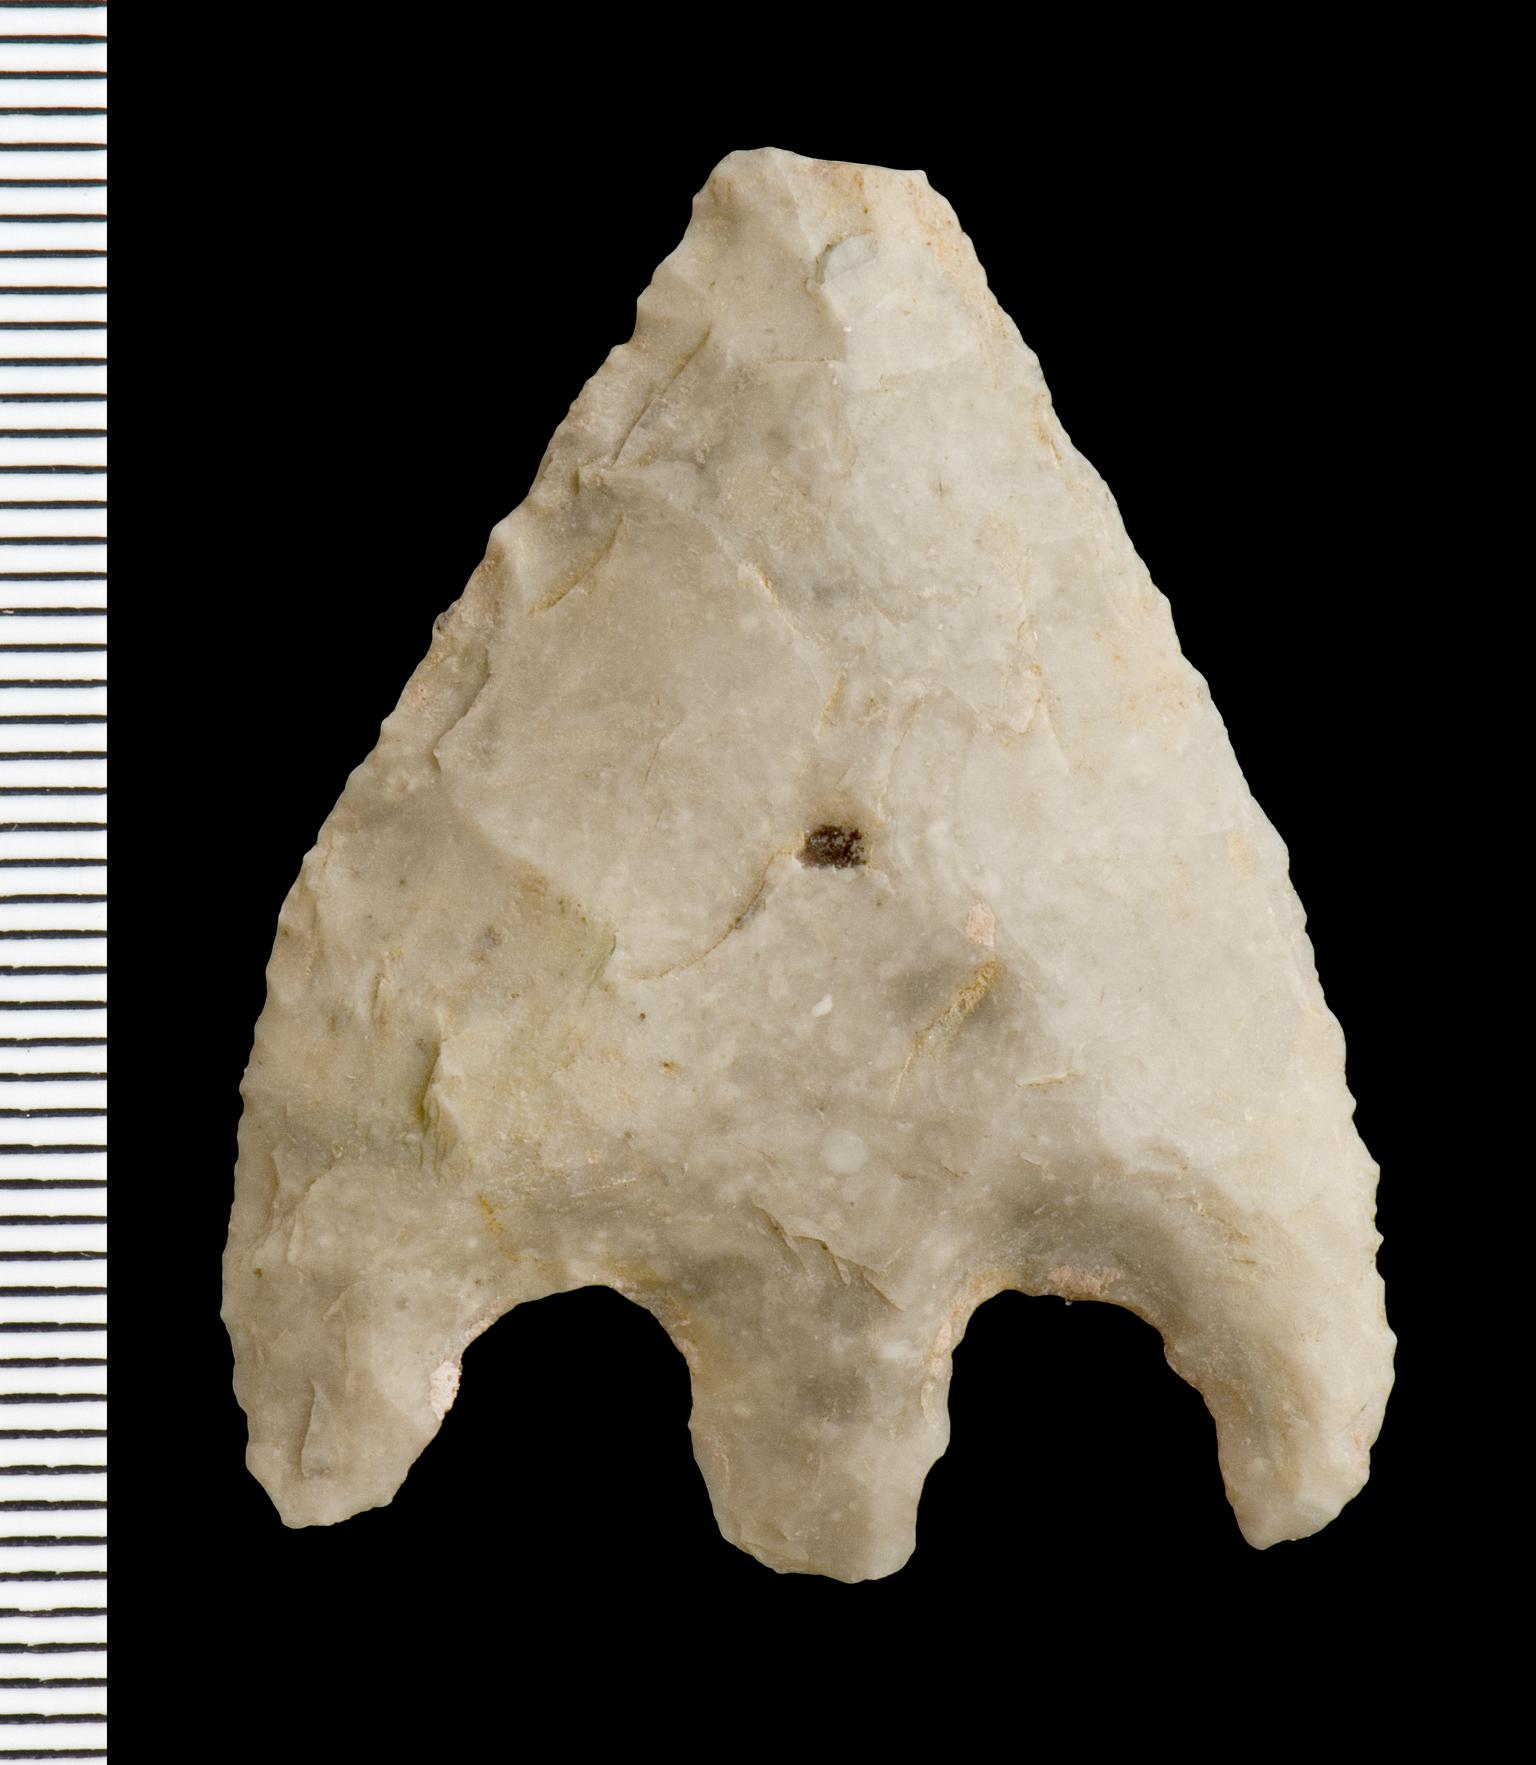 Bronze Age flint barbed and tanged arrowhead